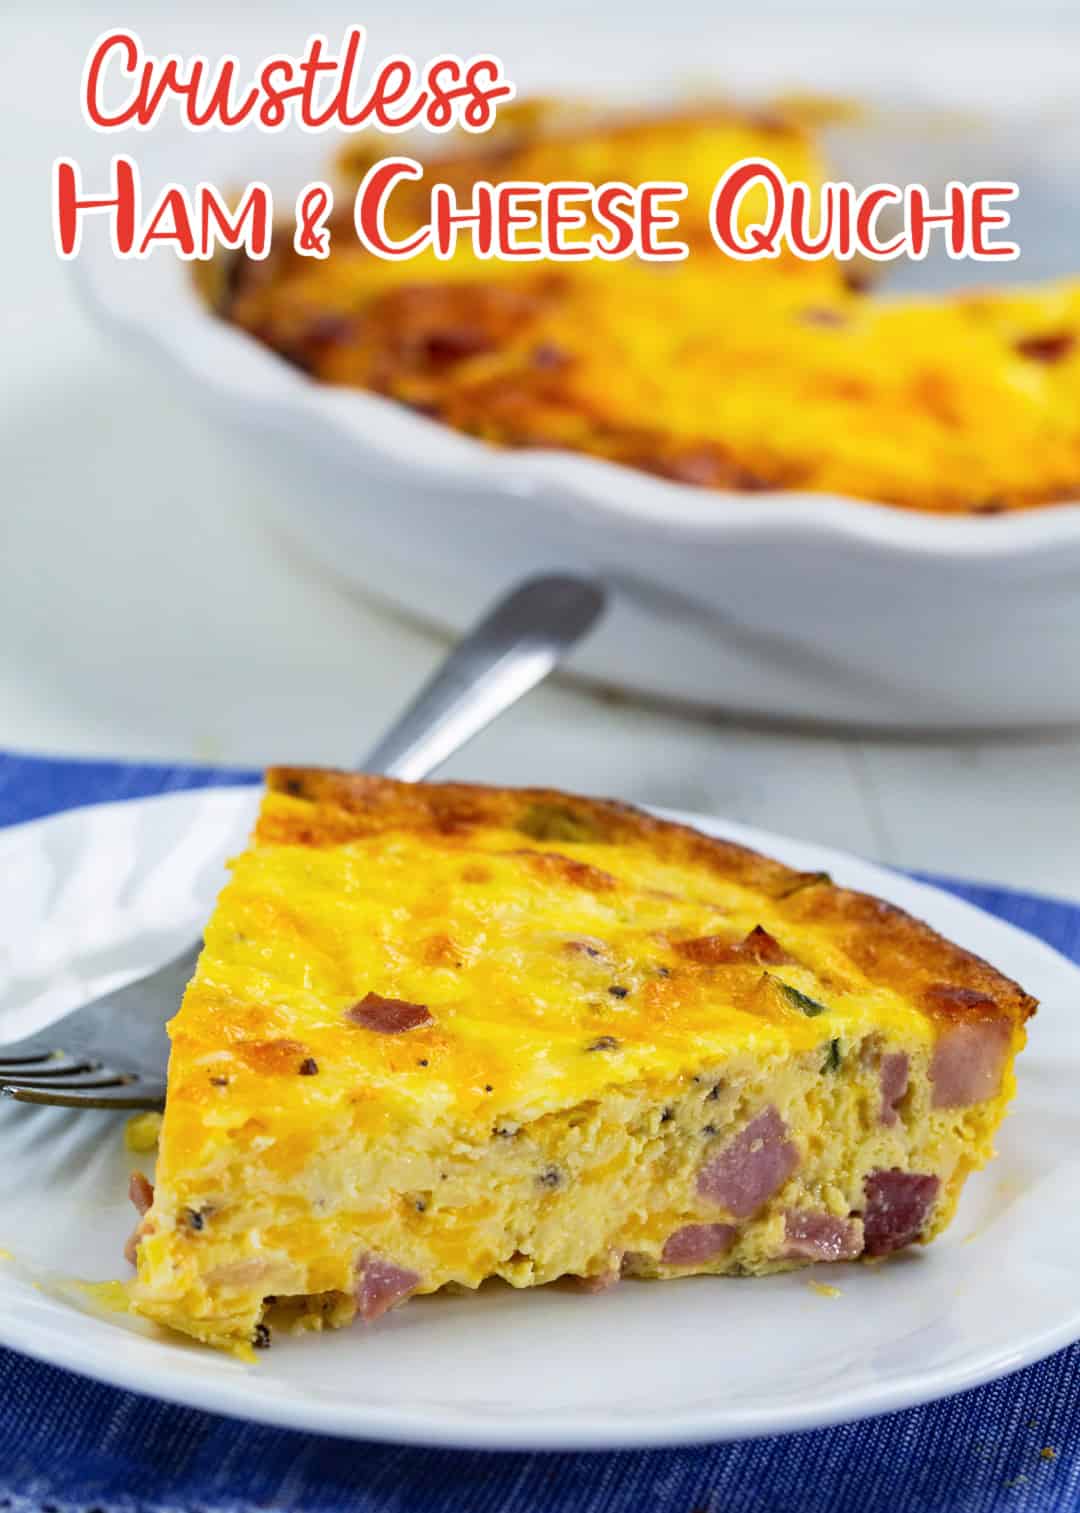 Slice of Crustless Ham and Cheese Quiche on a plate.